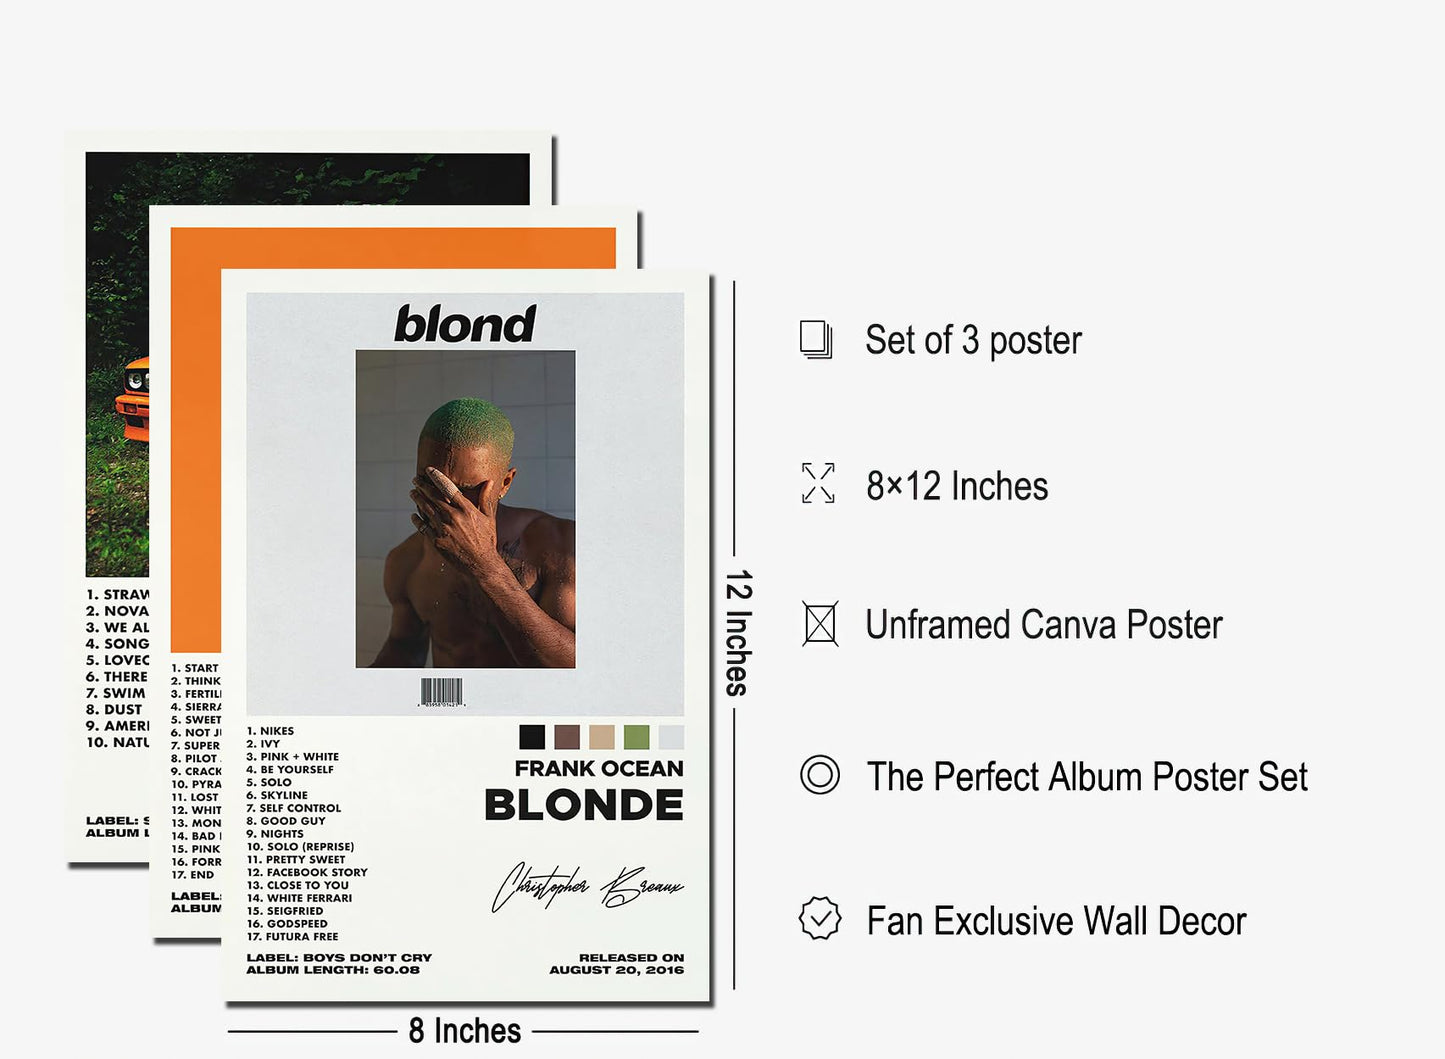 Bkioqoh A Set of 3 canvas posters,Frank Poster Ocean Blonde Poster Channel Orange Poster, Album Aesthetics 3 Piece Set,8x12IN Canvas Prints Unframed Set of 3